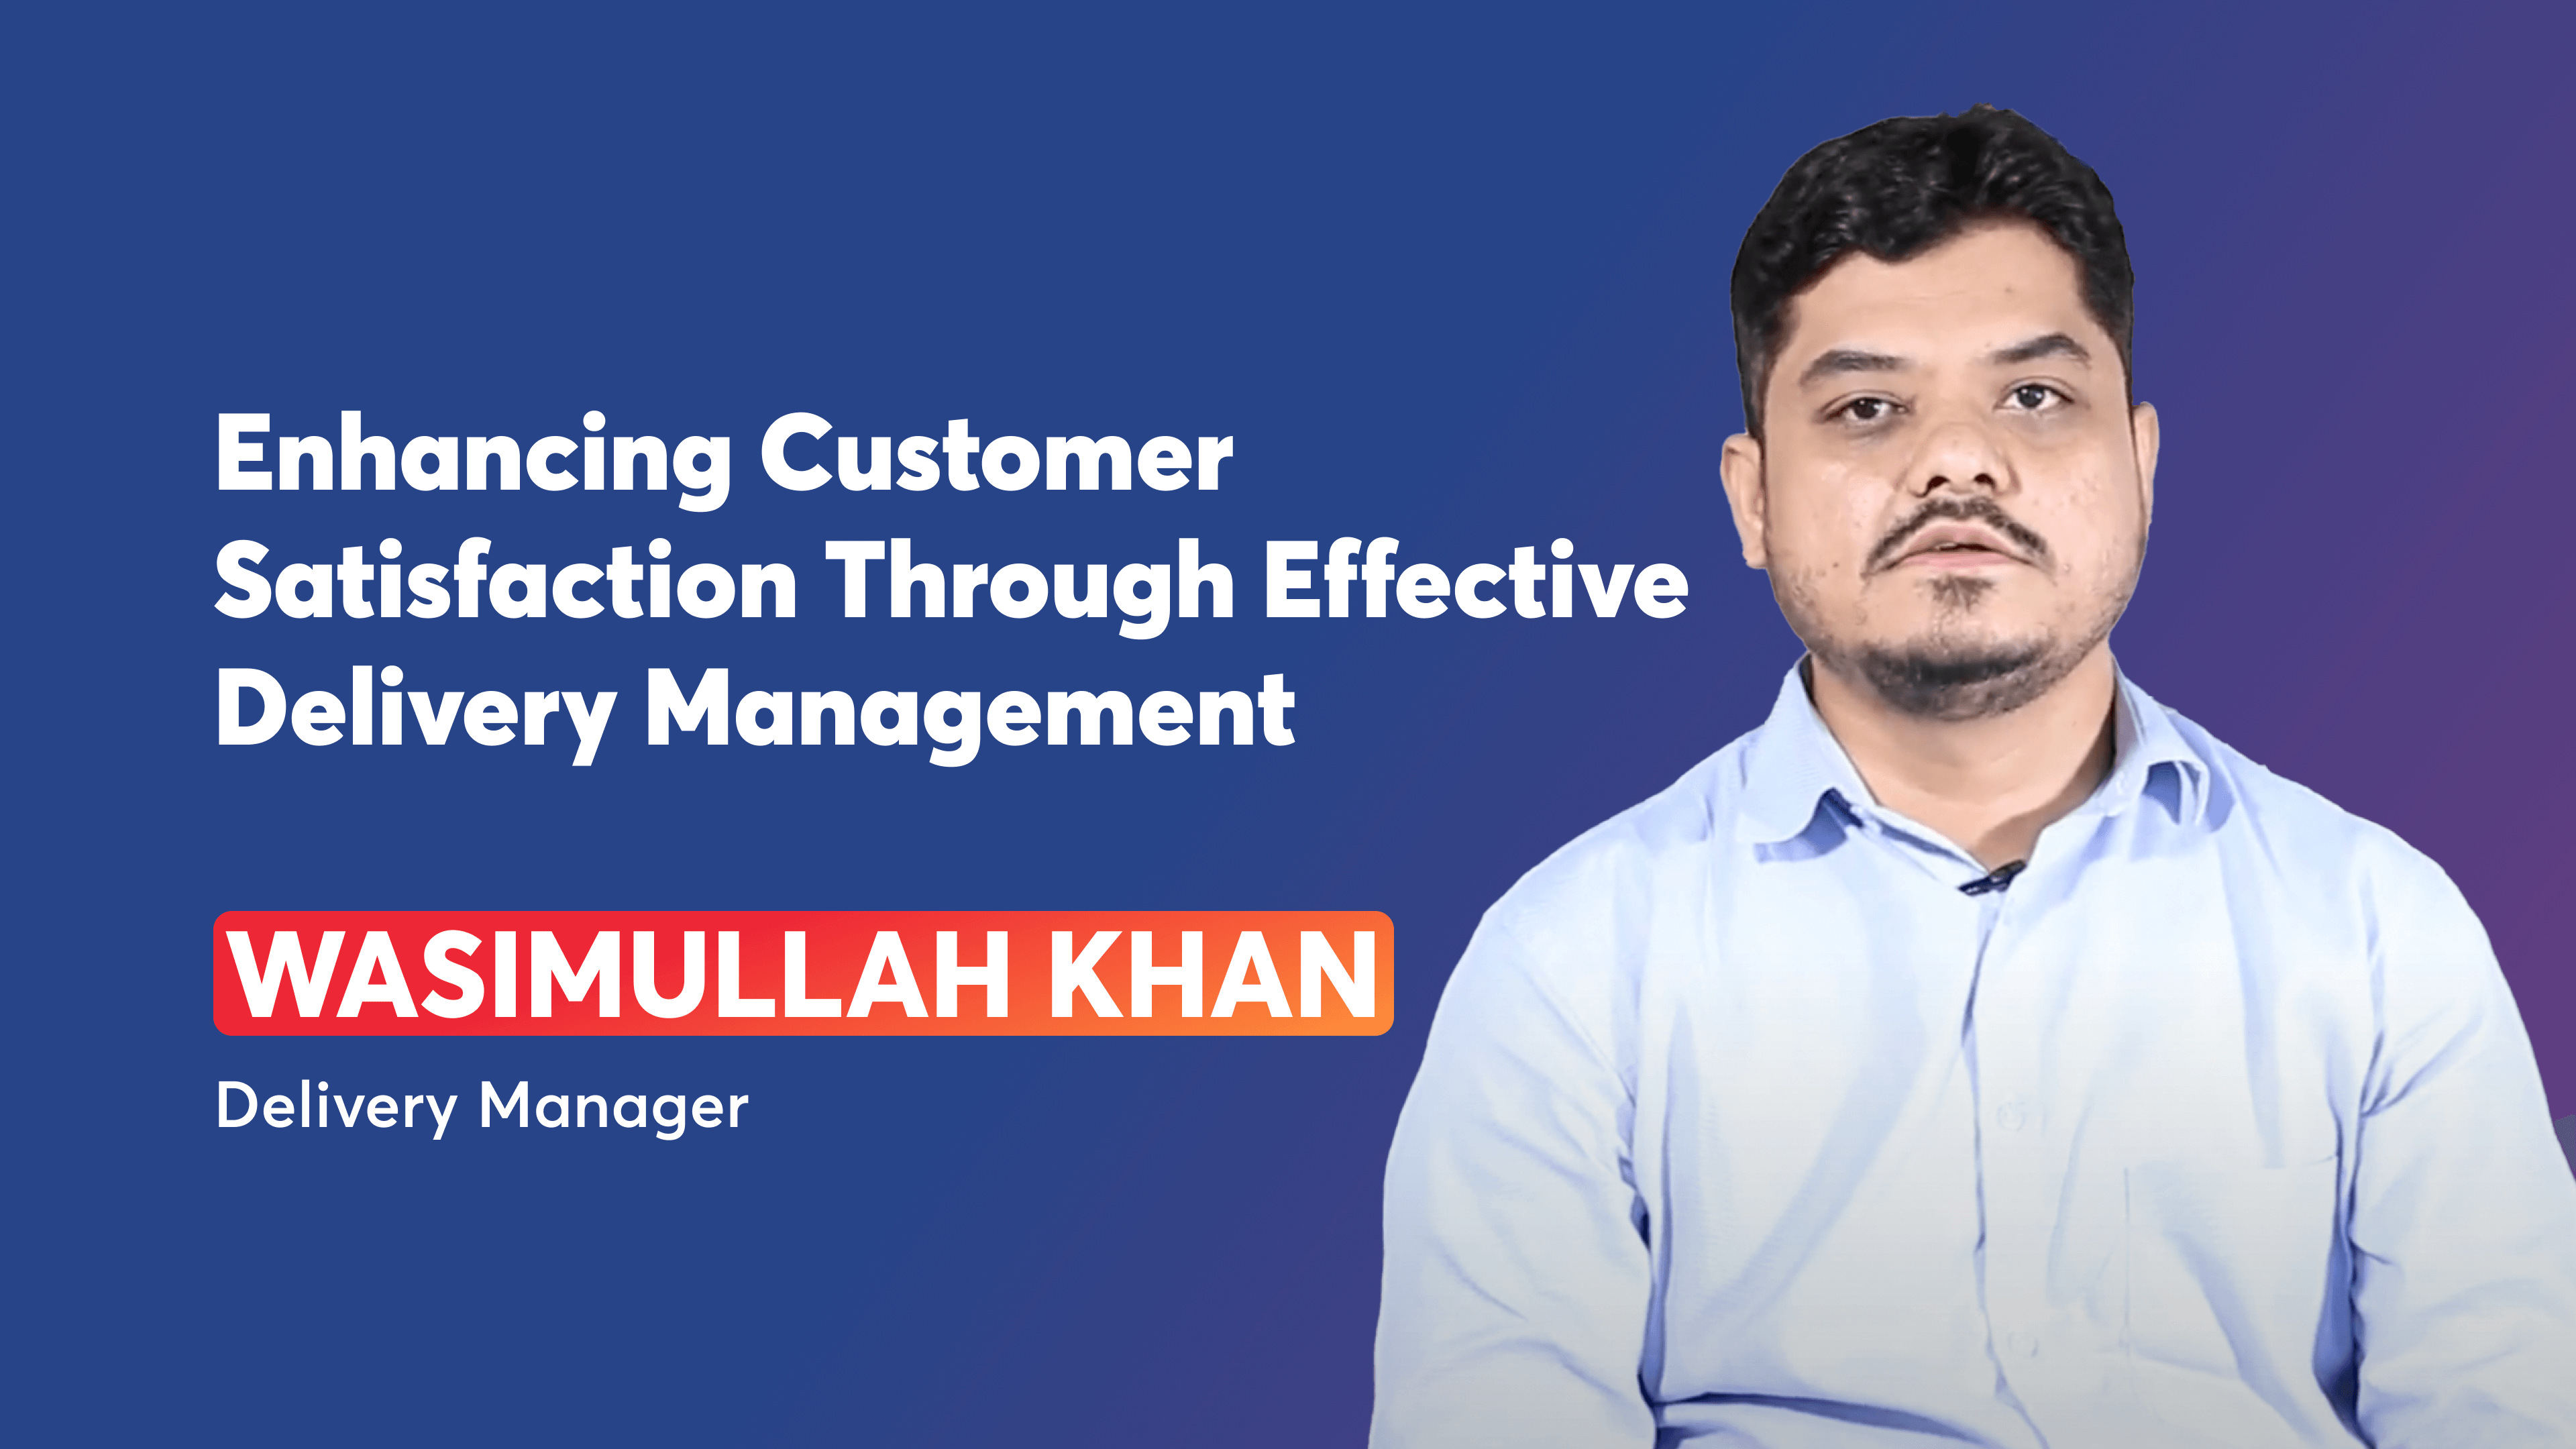 Enhancing Customer Satisfaction Through Effective Delivery Management